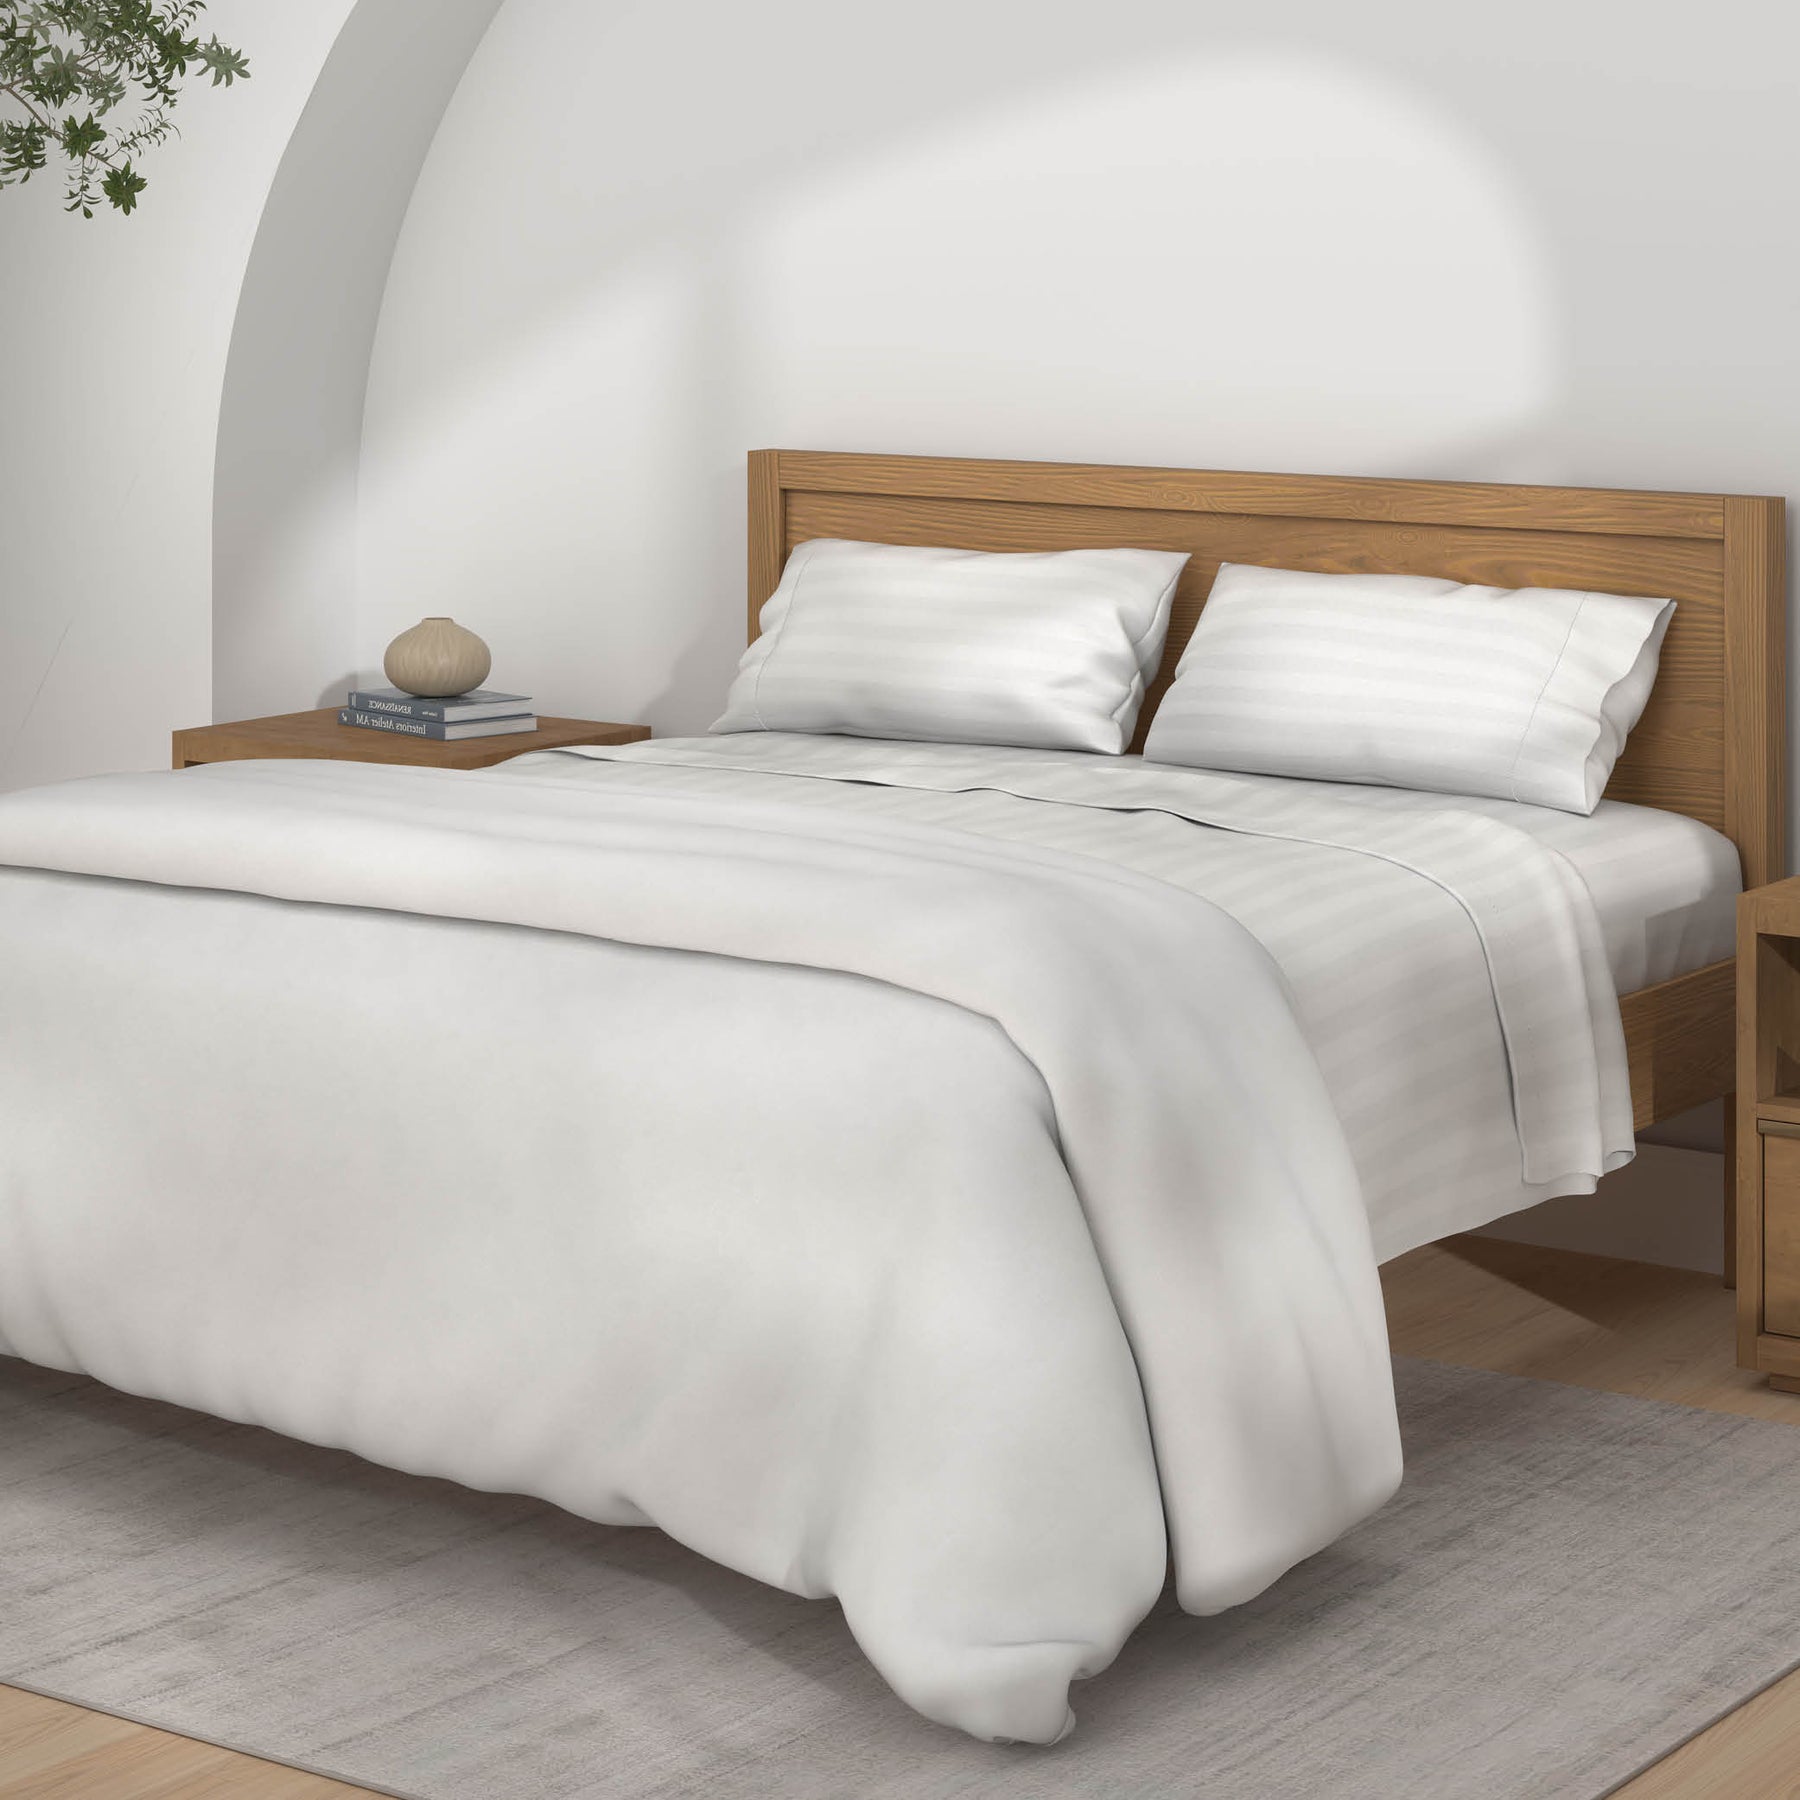 Image of a neatly made bed with the white Luxury Resort Hotel Collection Classic Cotton Sheets on the bed